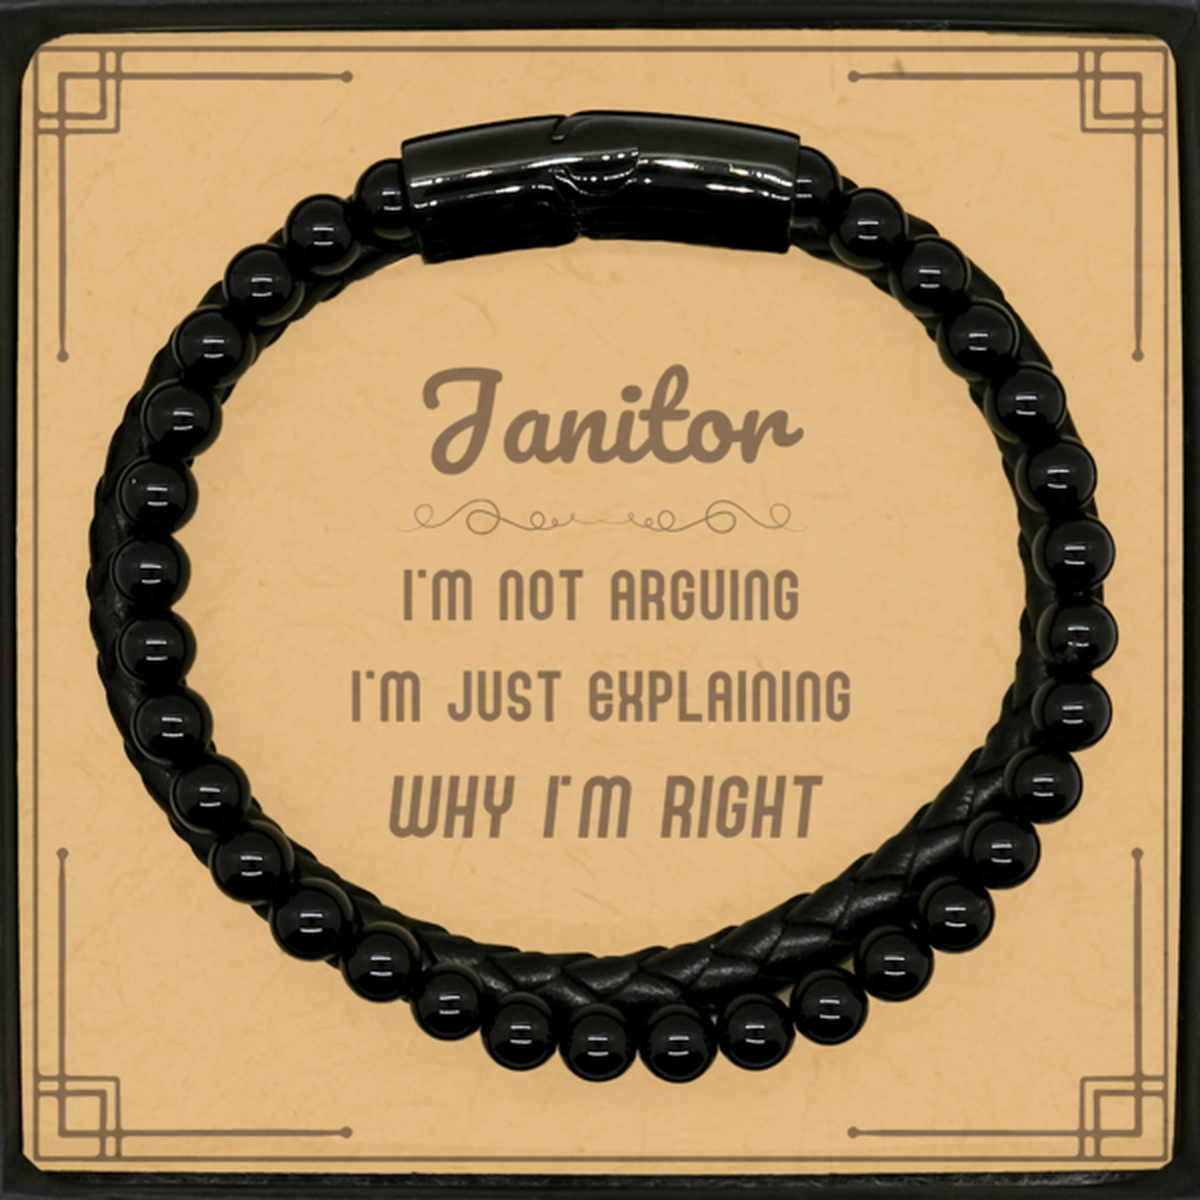 Janitor I'm not Arguing. I'm Just Explaining Why I'm RIGHT Stone Leather Bracelets, Funny Saying Quote Janitor Gifts For Janitor Message Card Graduation Birthday Christmas Gifts for Men Women Coworker